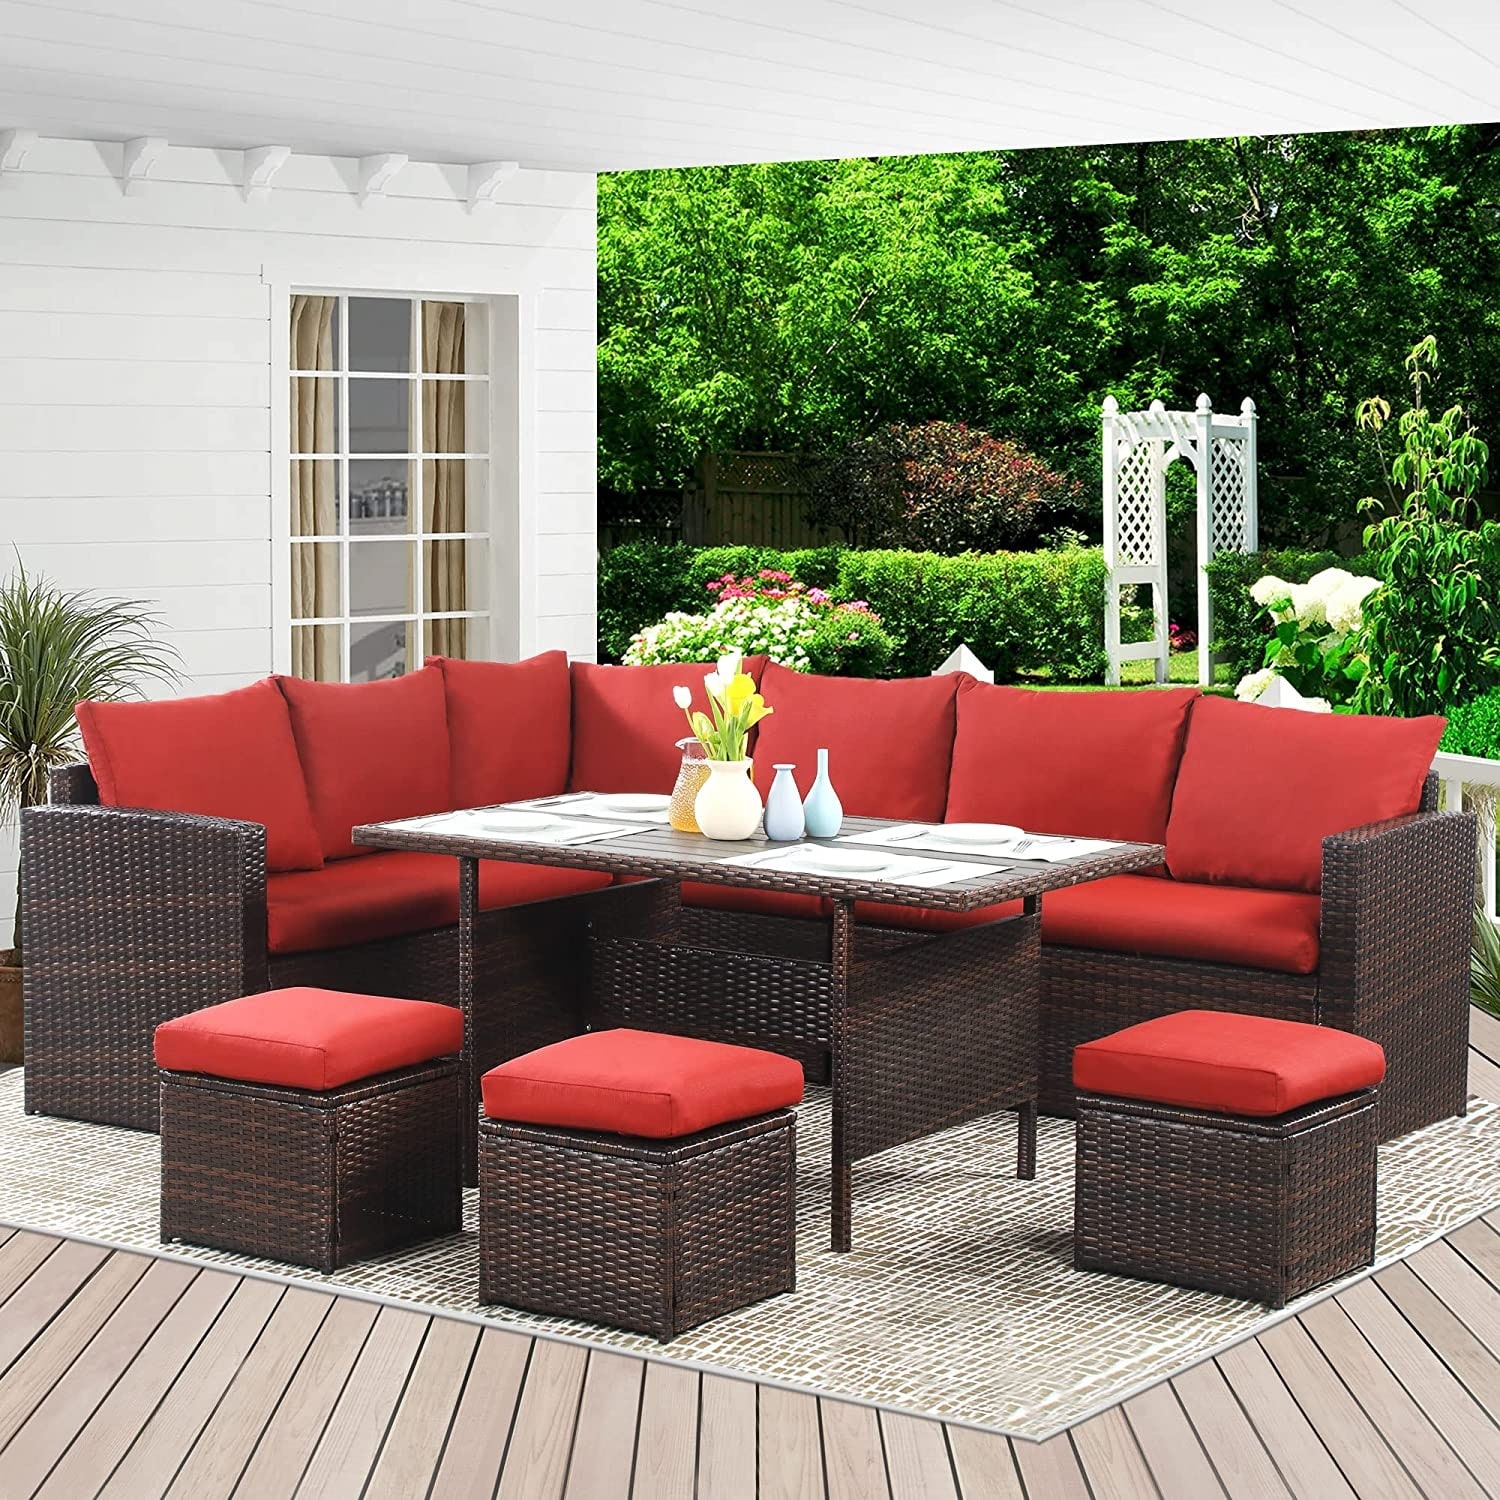 7-pieces Pe Rattan Wicker Patio Dining Sofa Set  Outdoor Large Sofa Table And Chair  Conversation Sets - 30w X 52l X 26.2h